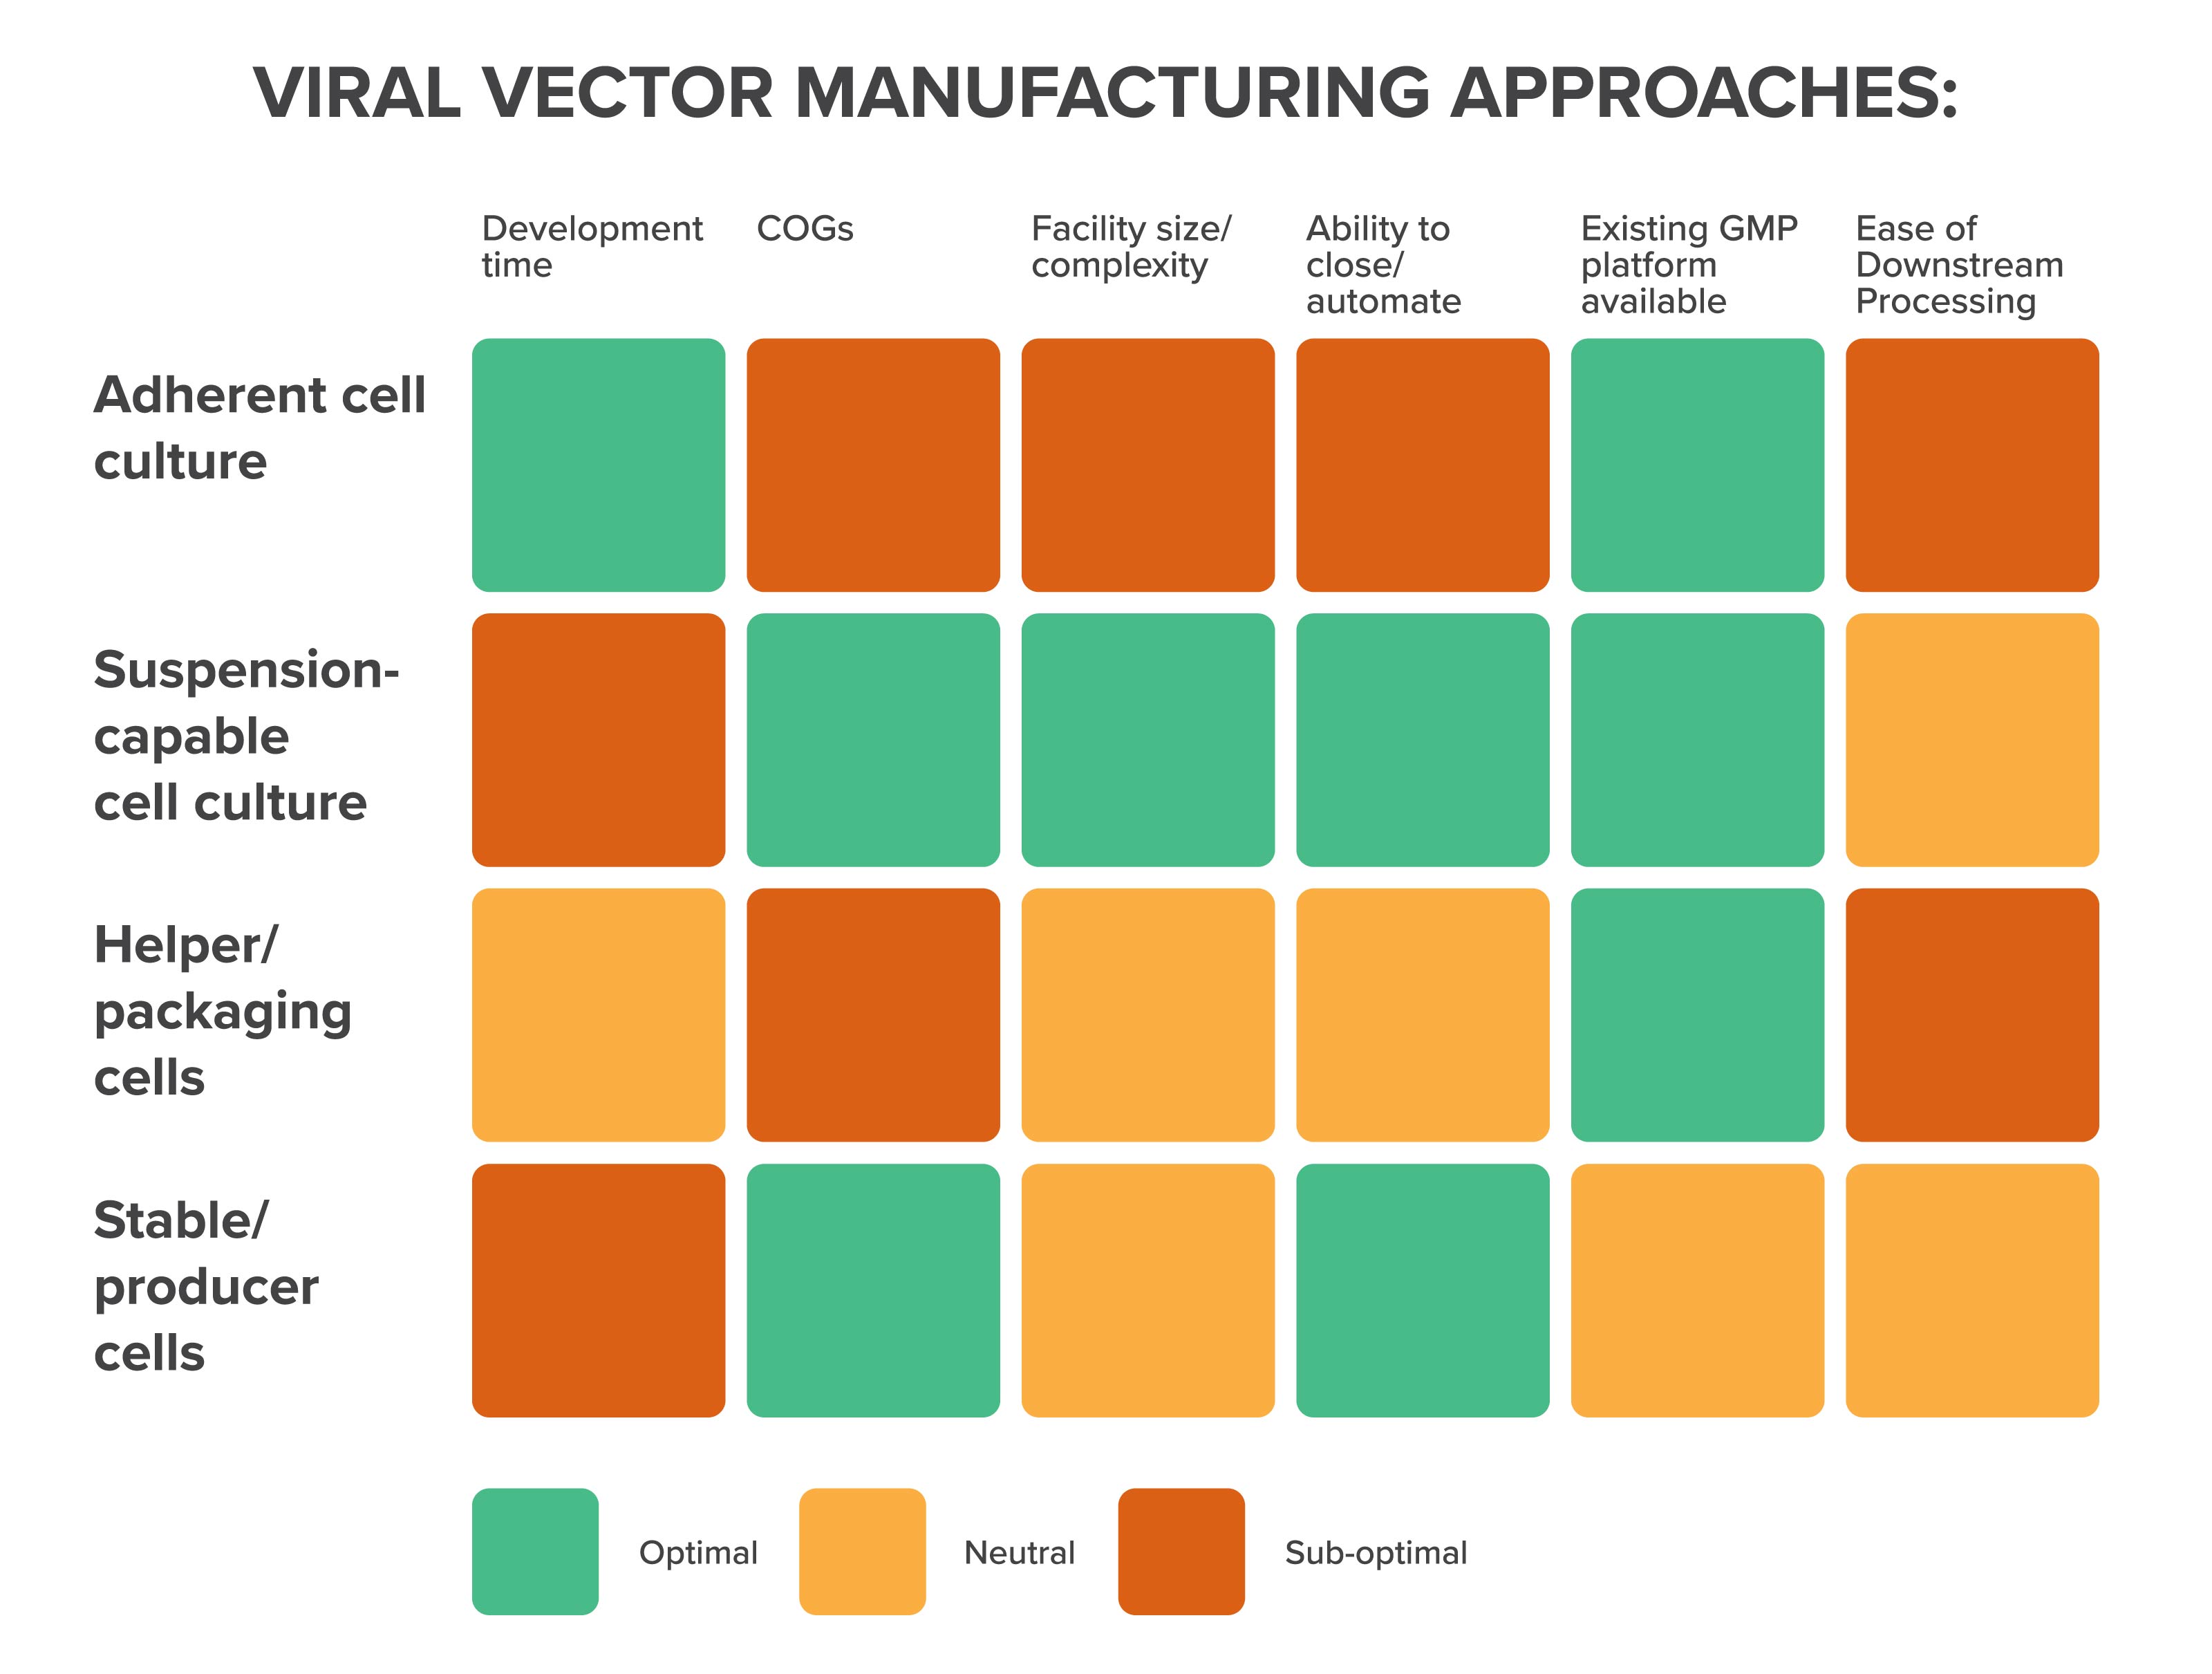 Viral vector manufacturing approaches